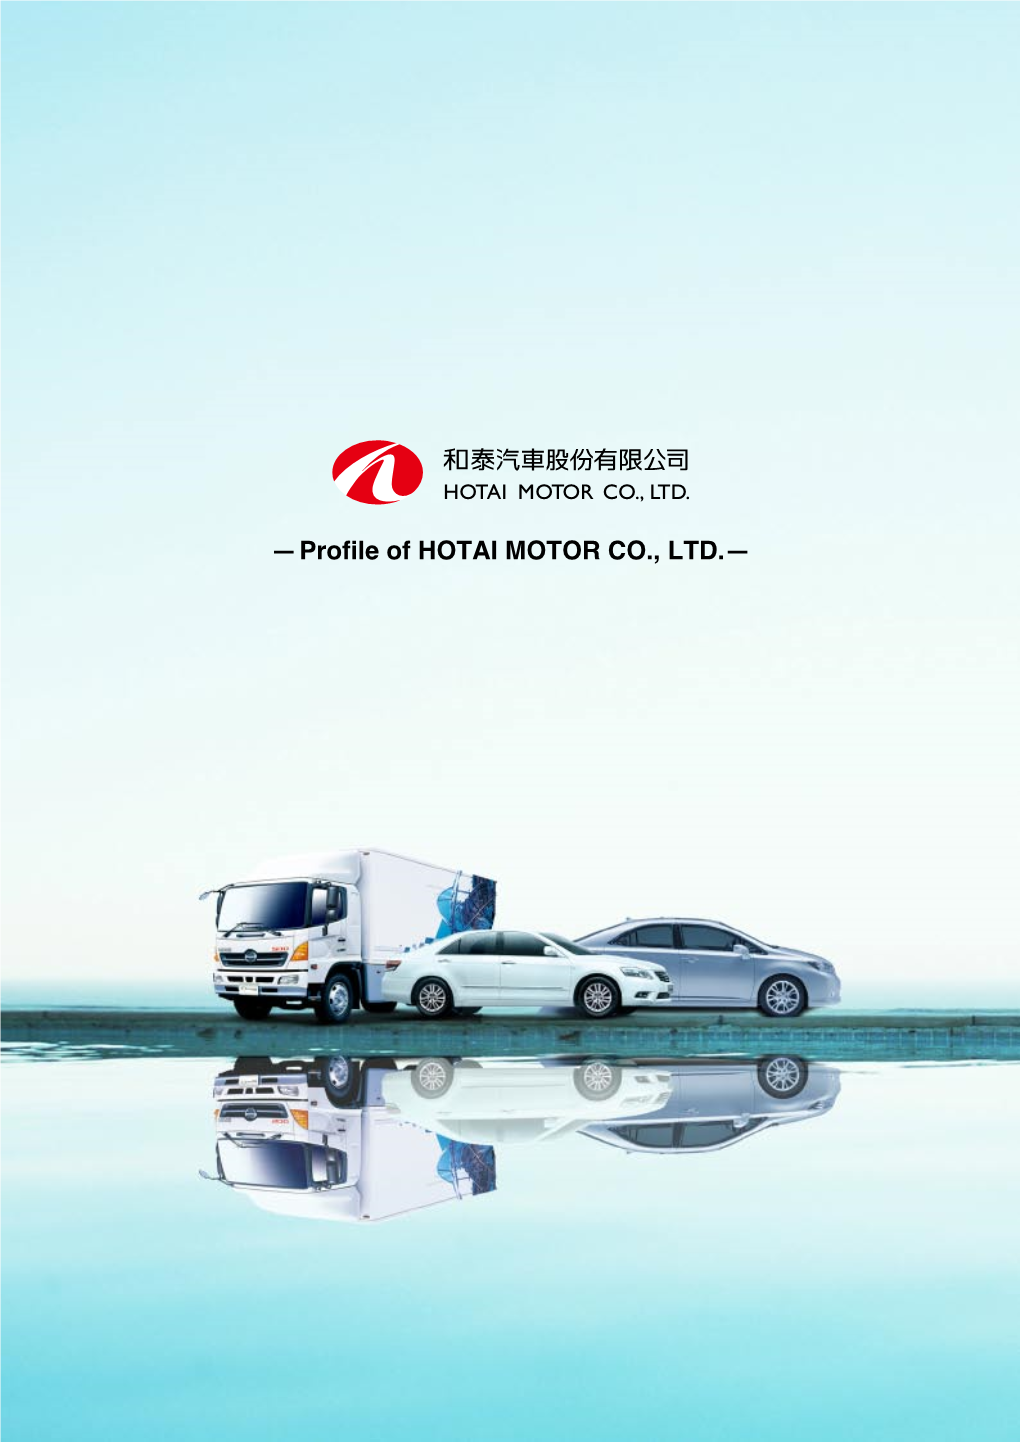 —Profile of HOTAI MOTOR CO., LTD.— Excelling Today’S Dream